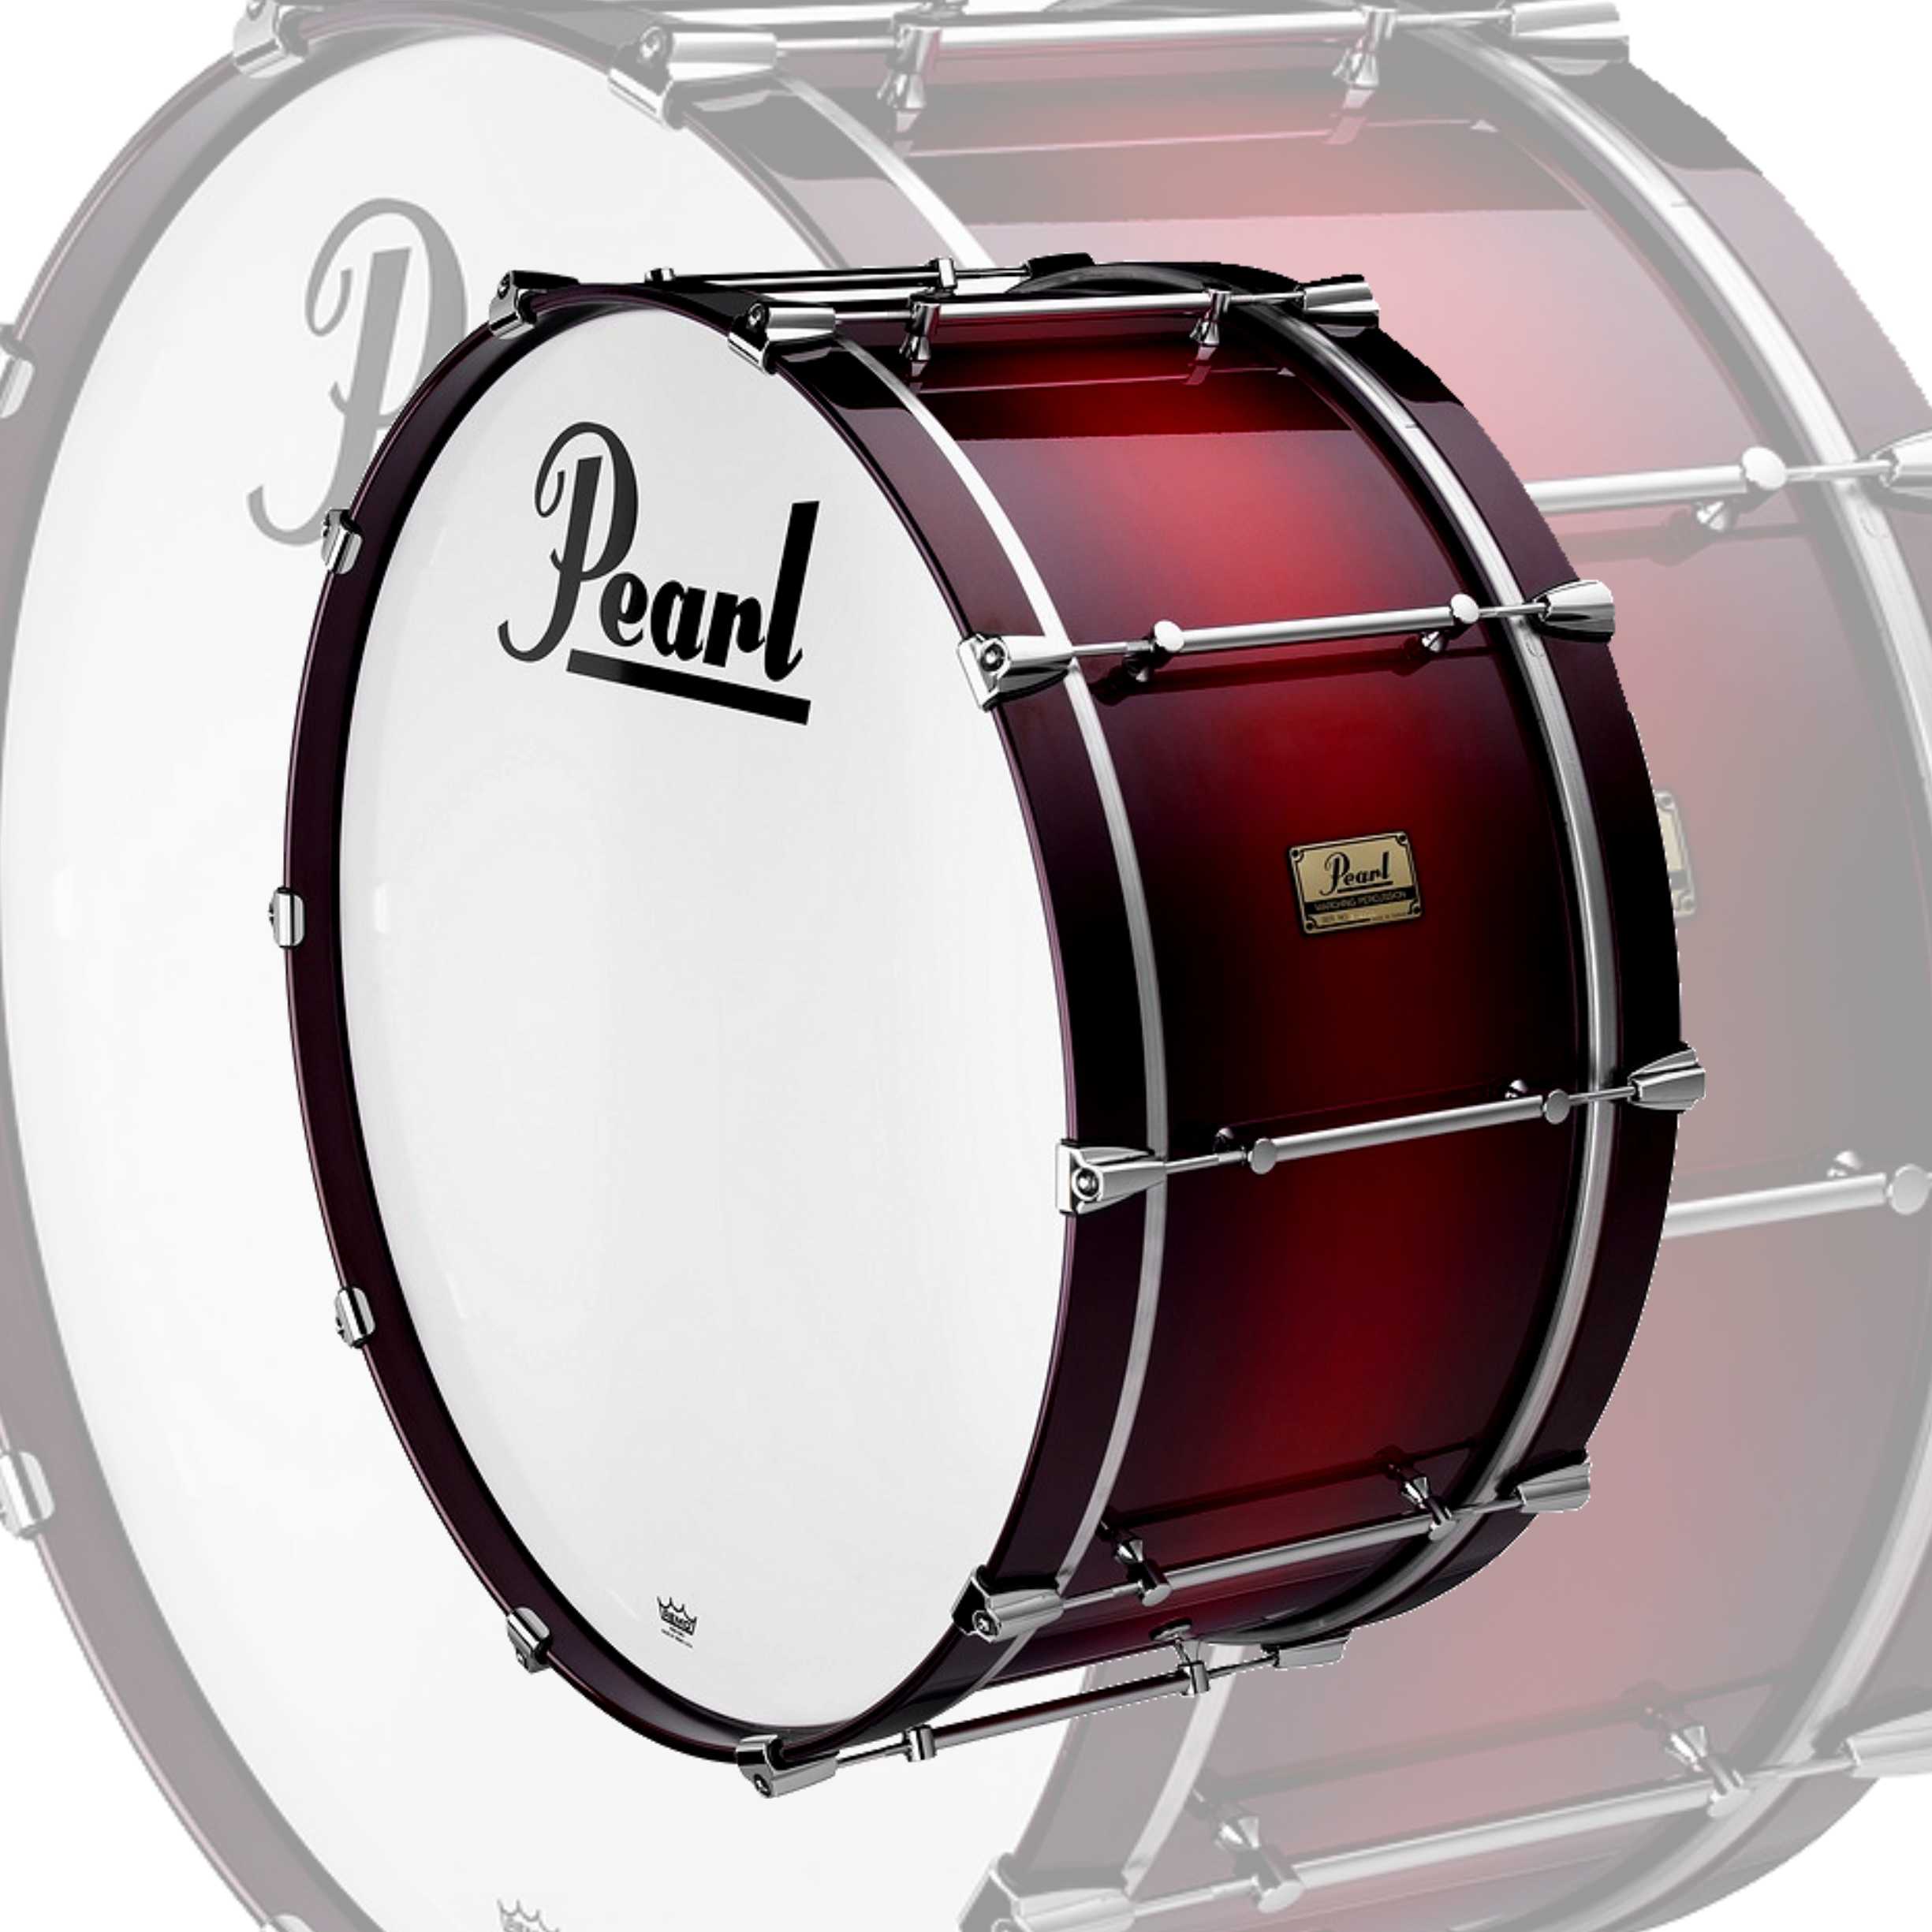 Pearl Pipe Band 26"x14" Marching Bass Drum